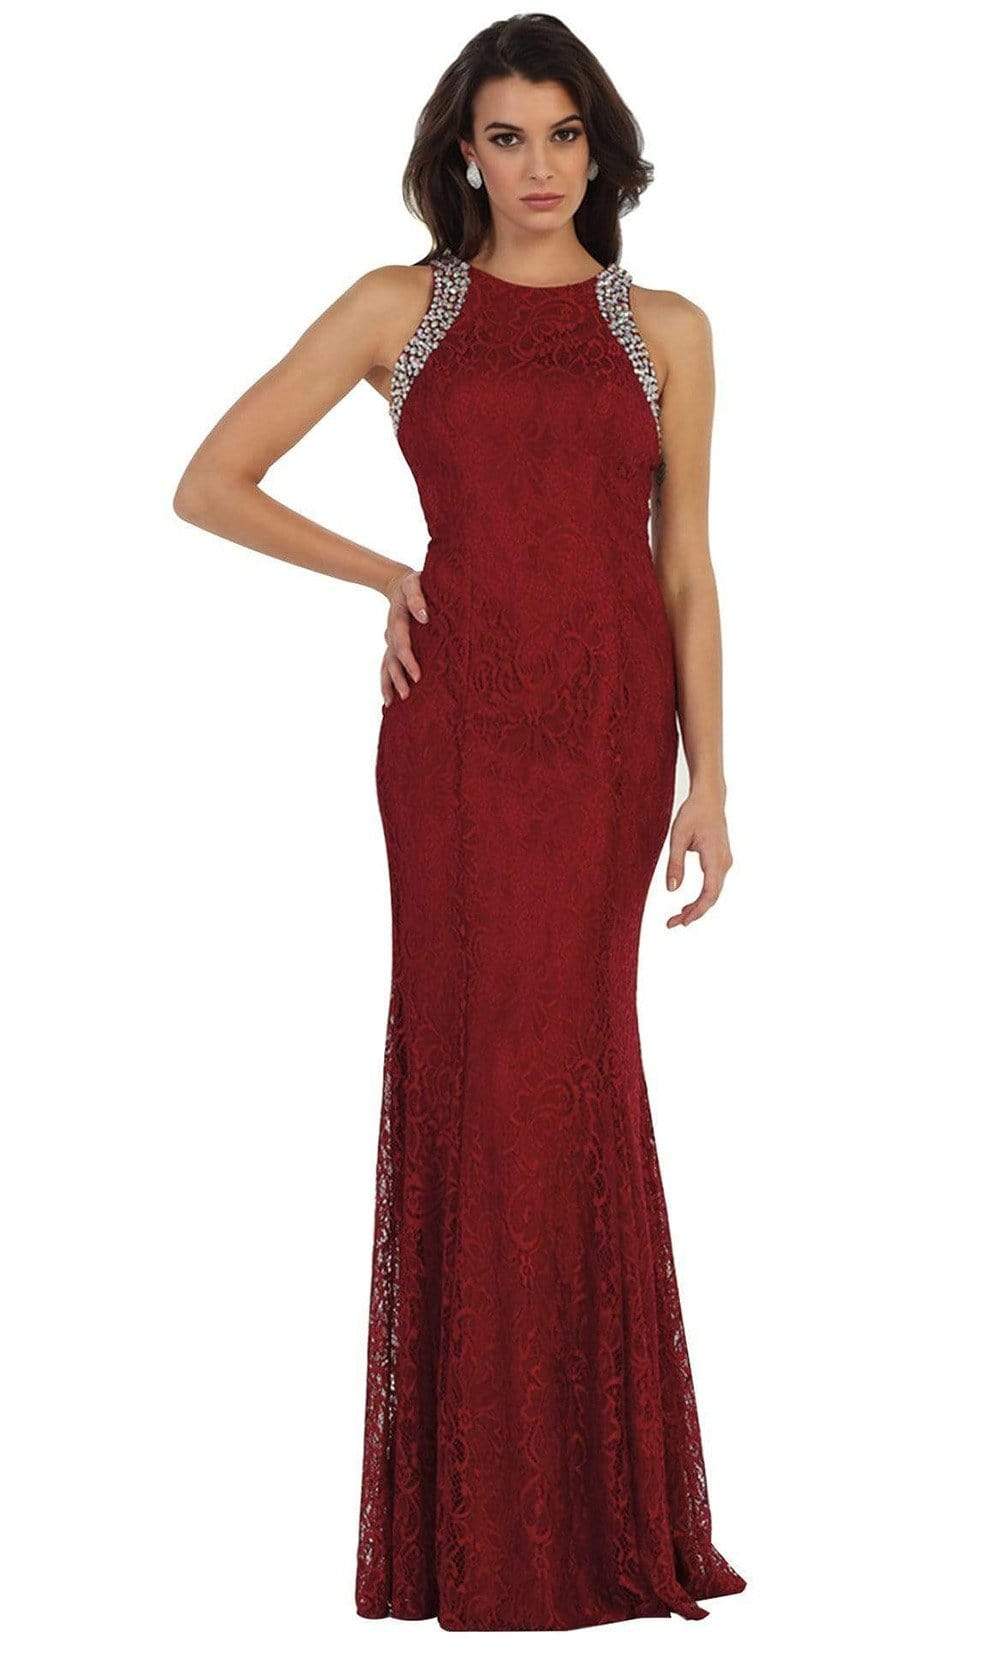 May Queen - Elegant Sleeveless Rhinestone Lace Prom Dress Special Occasion Dress 4 / Burgundy